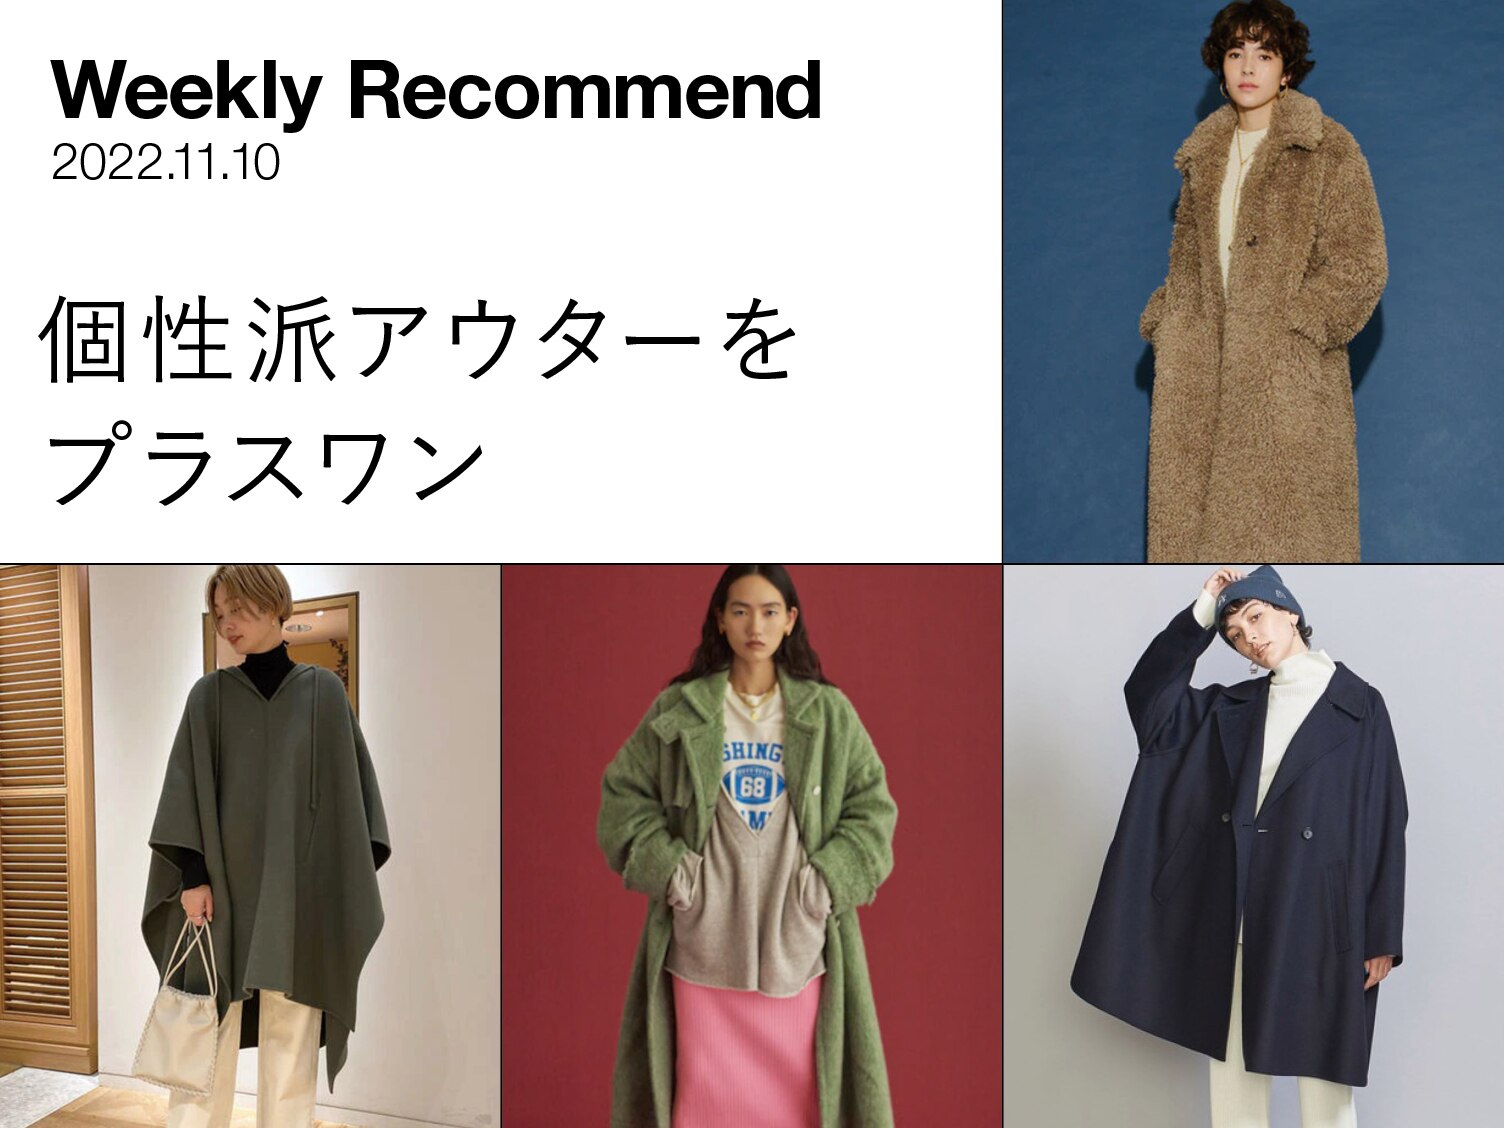 WEEKLY RECOMMEND ｜ 個性派アウターをプラスワン